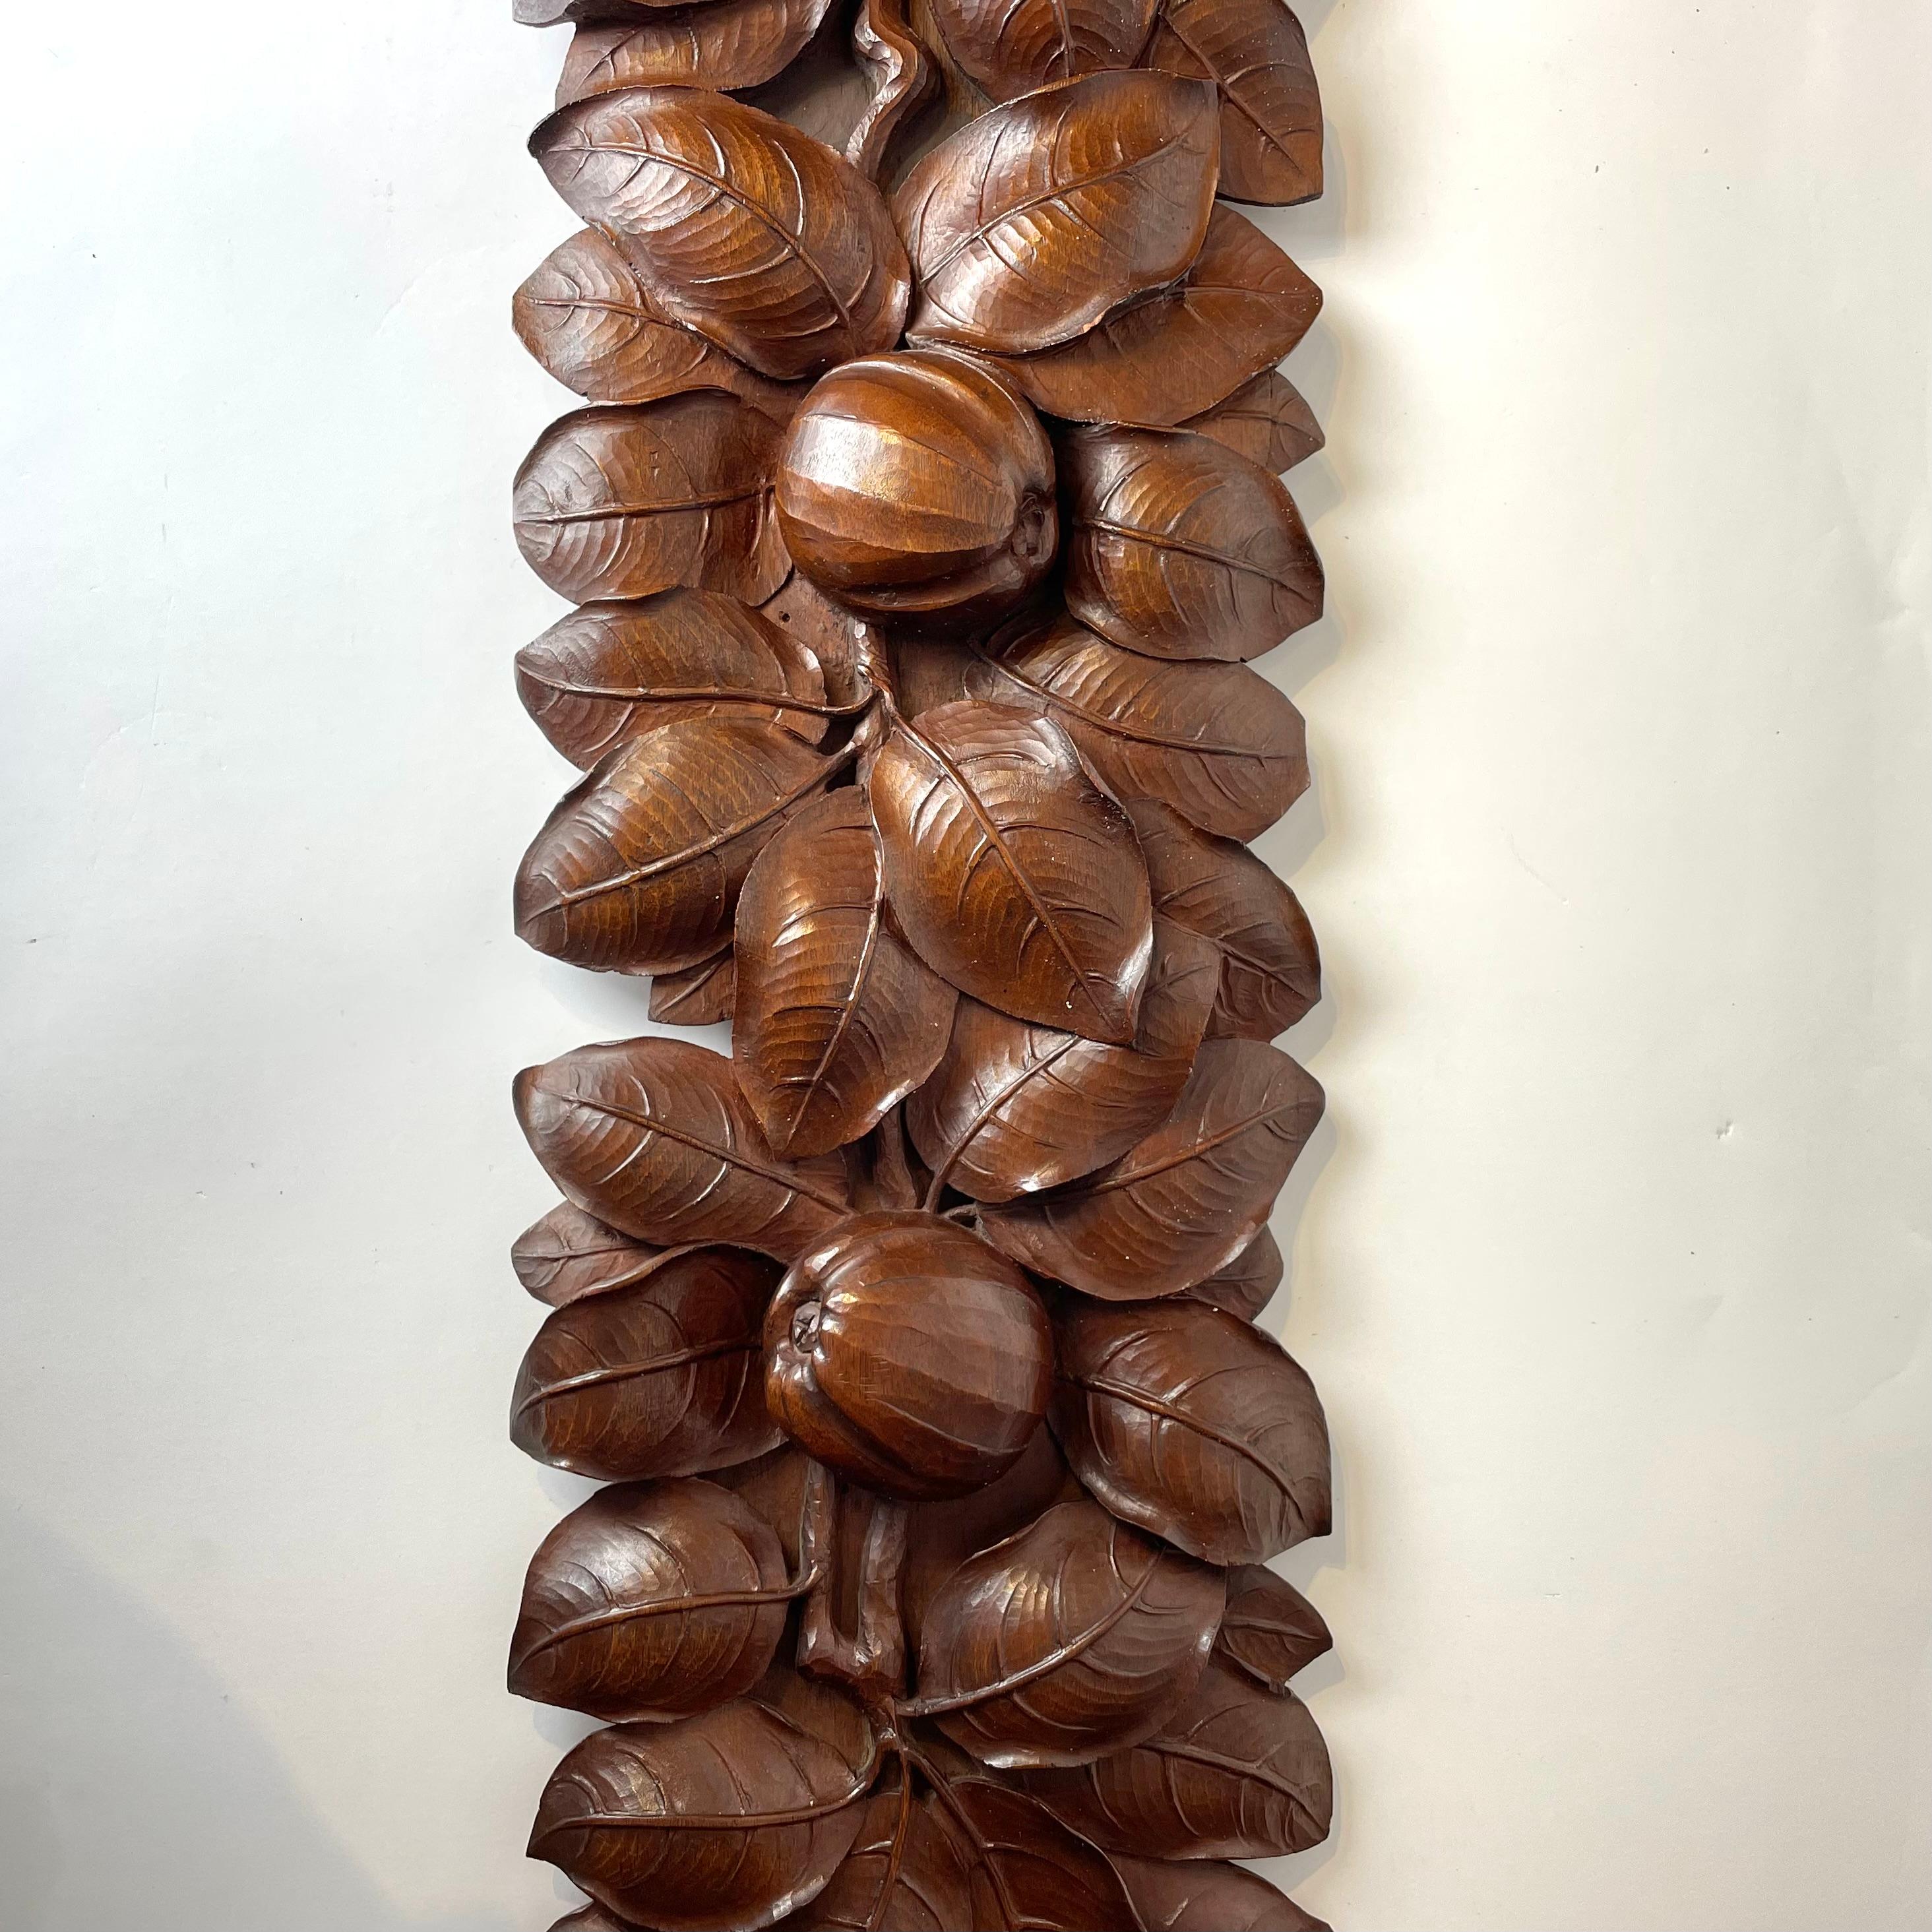 Walnut Woodcarved Decorative Element Depicting Apples Foliage Early 20th Century For Sale 1